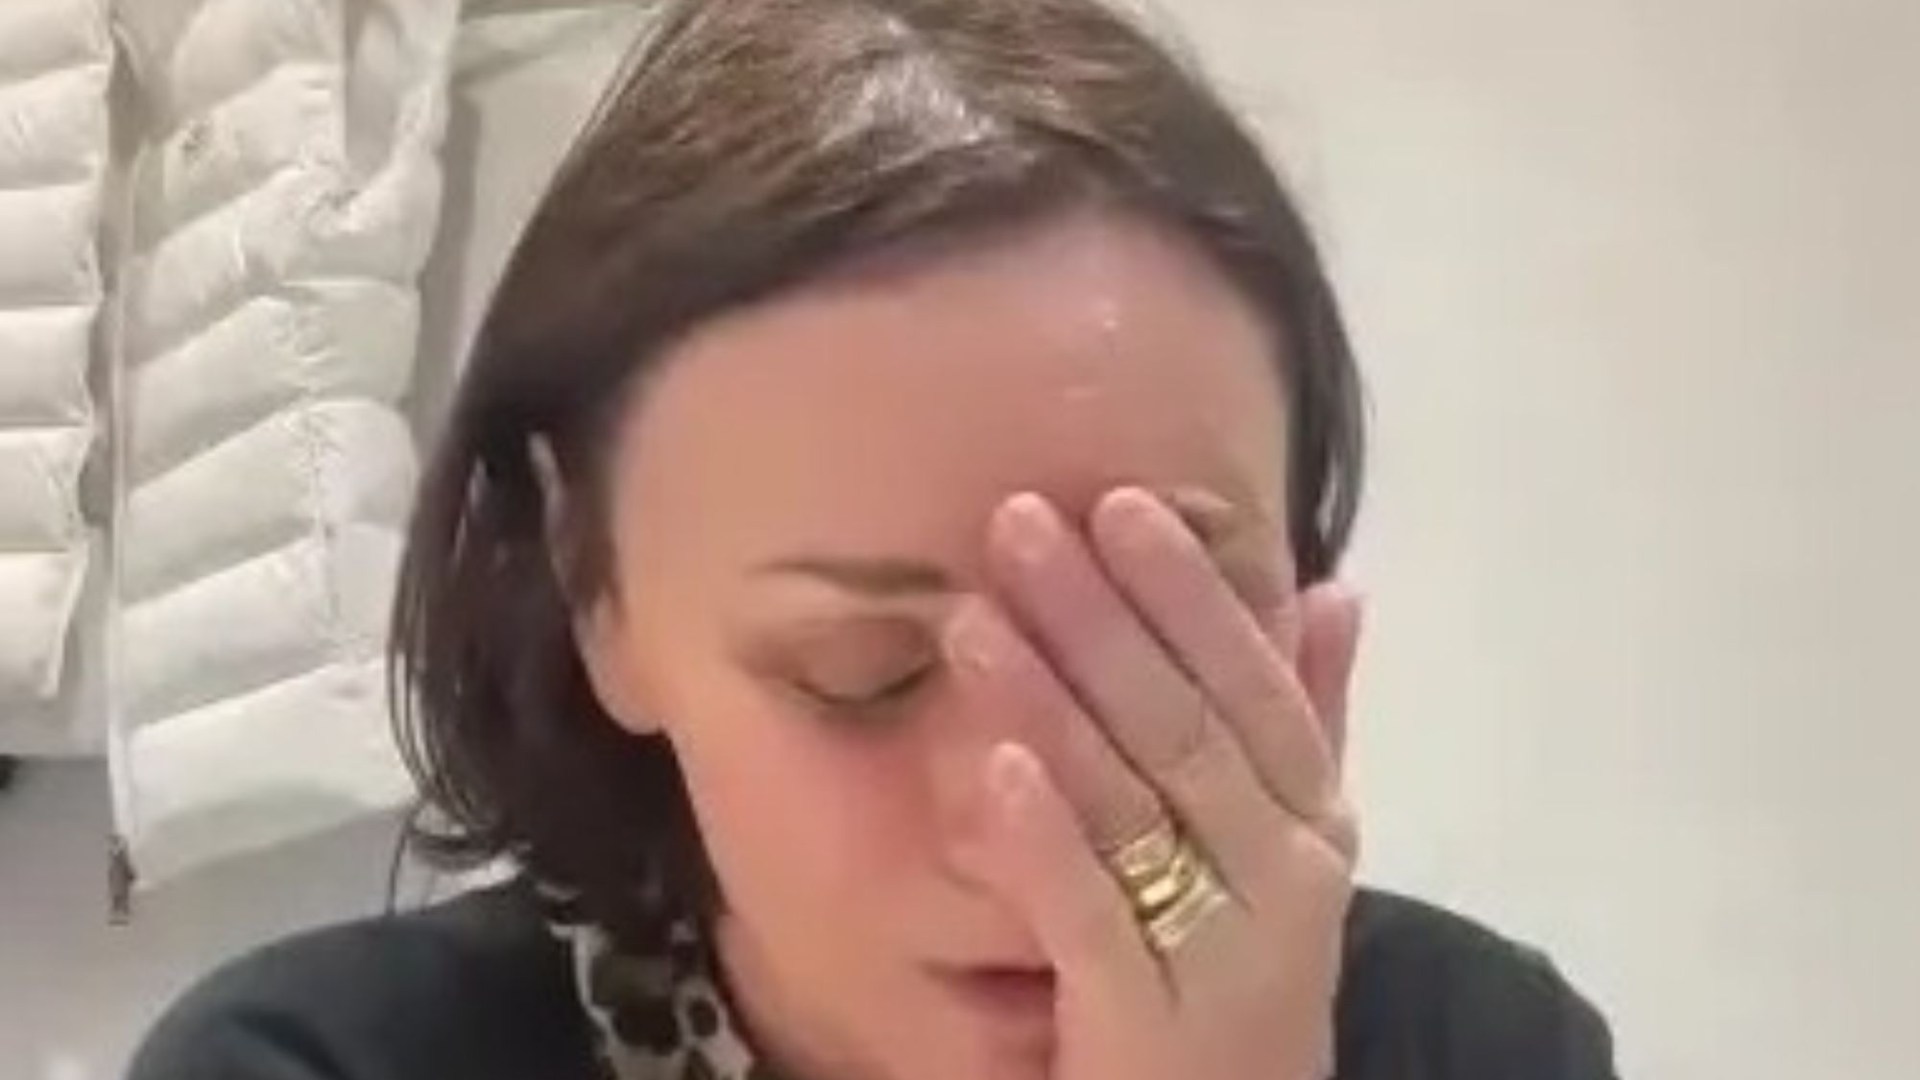 I fear Ive worked myself to death, admits Strictlys Shirley Ballas after revealing terrifying cancer scare  The Sun [Video]